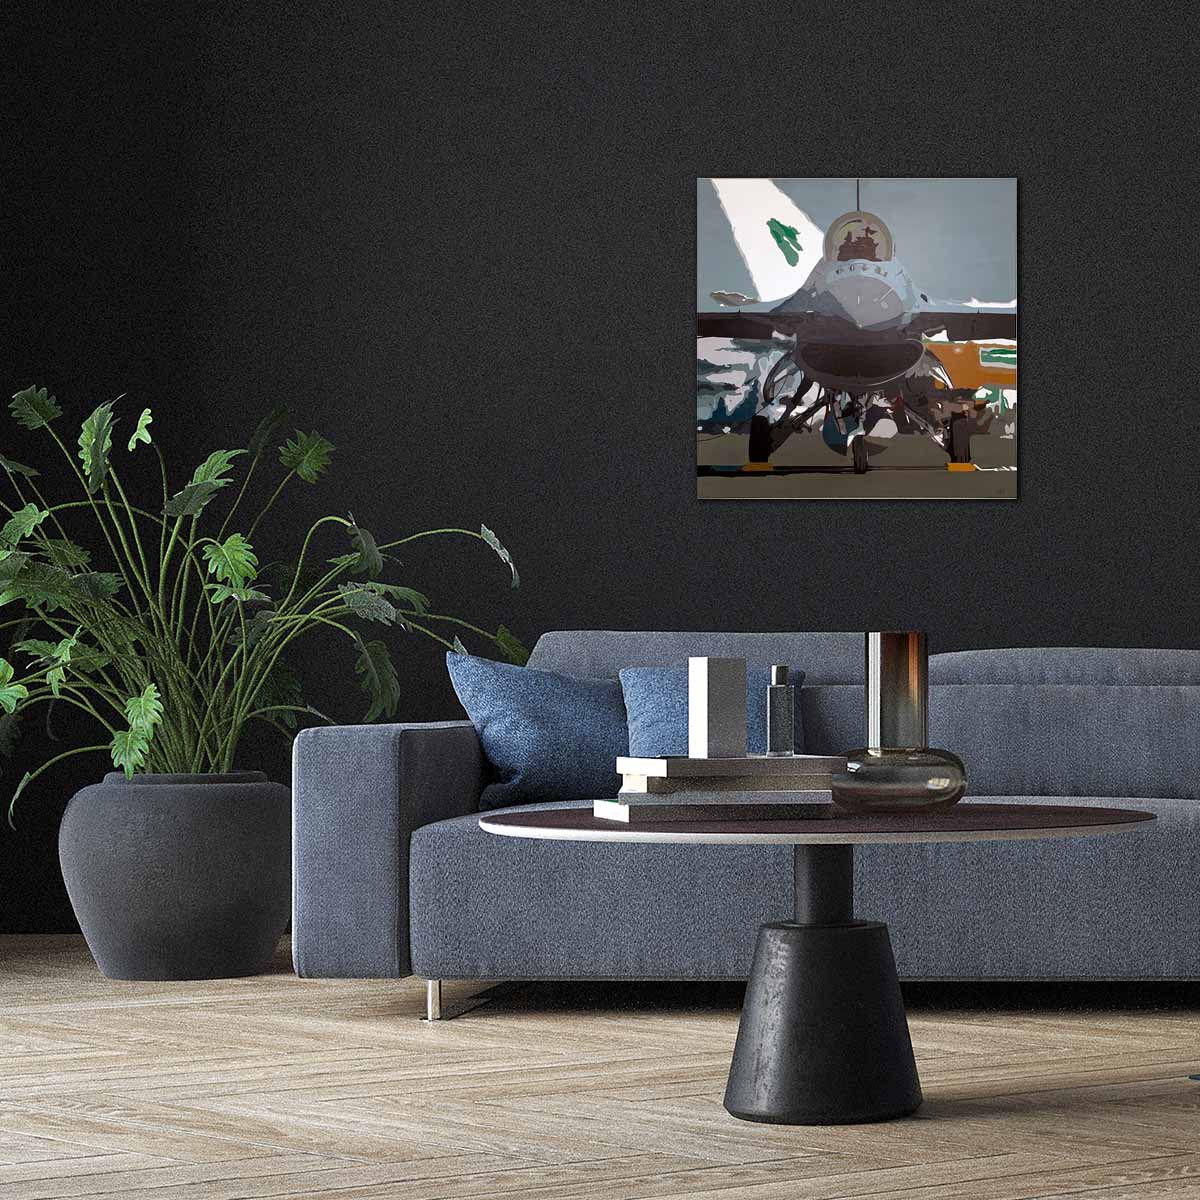 Acrylic painting of an F-16 in a living room. For sale.